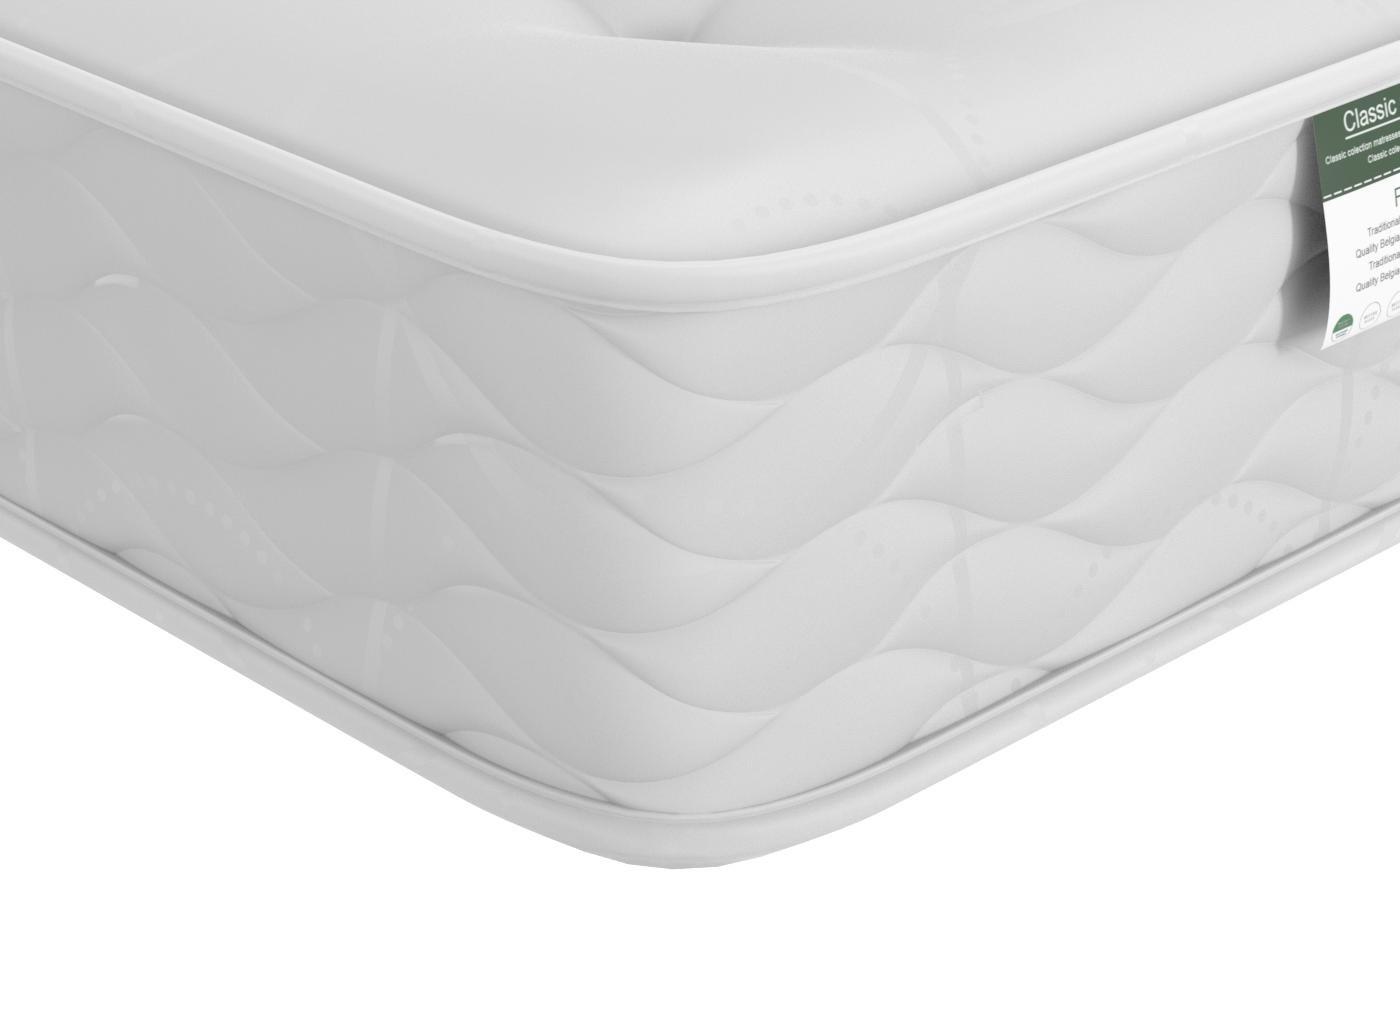 fenton traditional spring mattress review